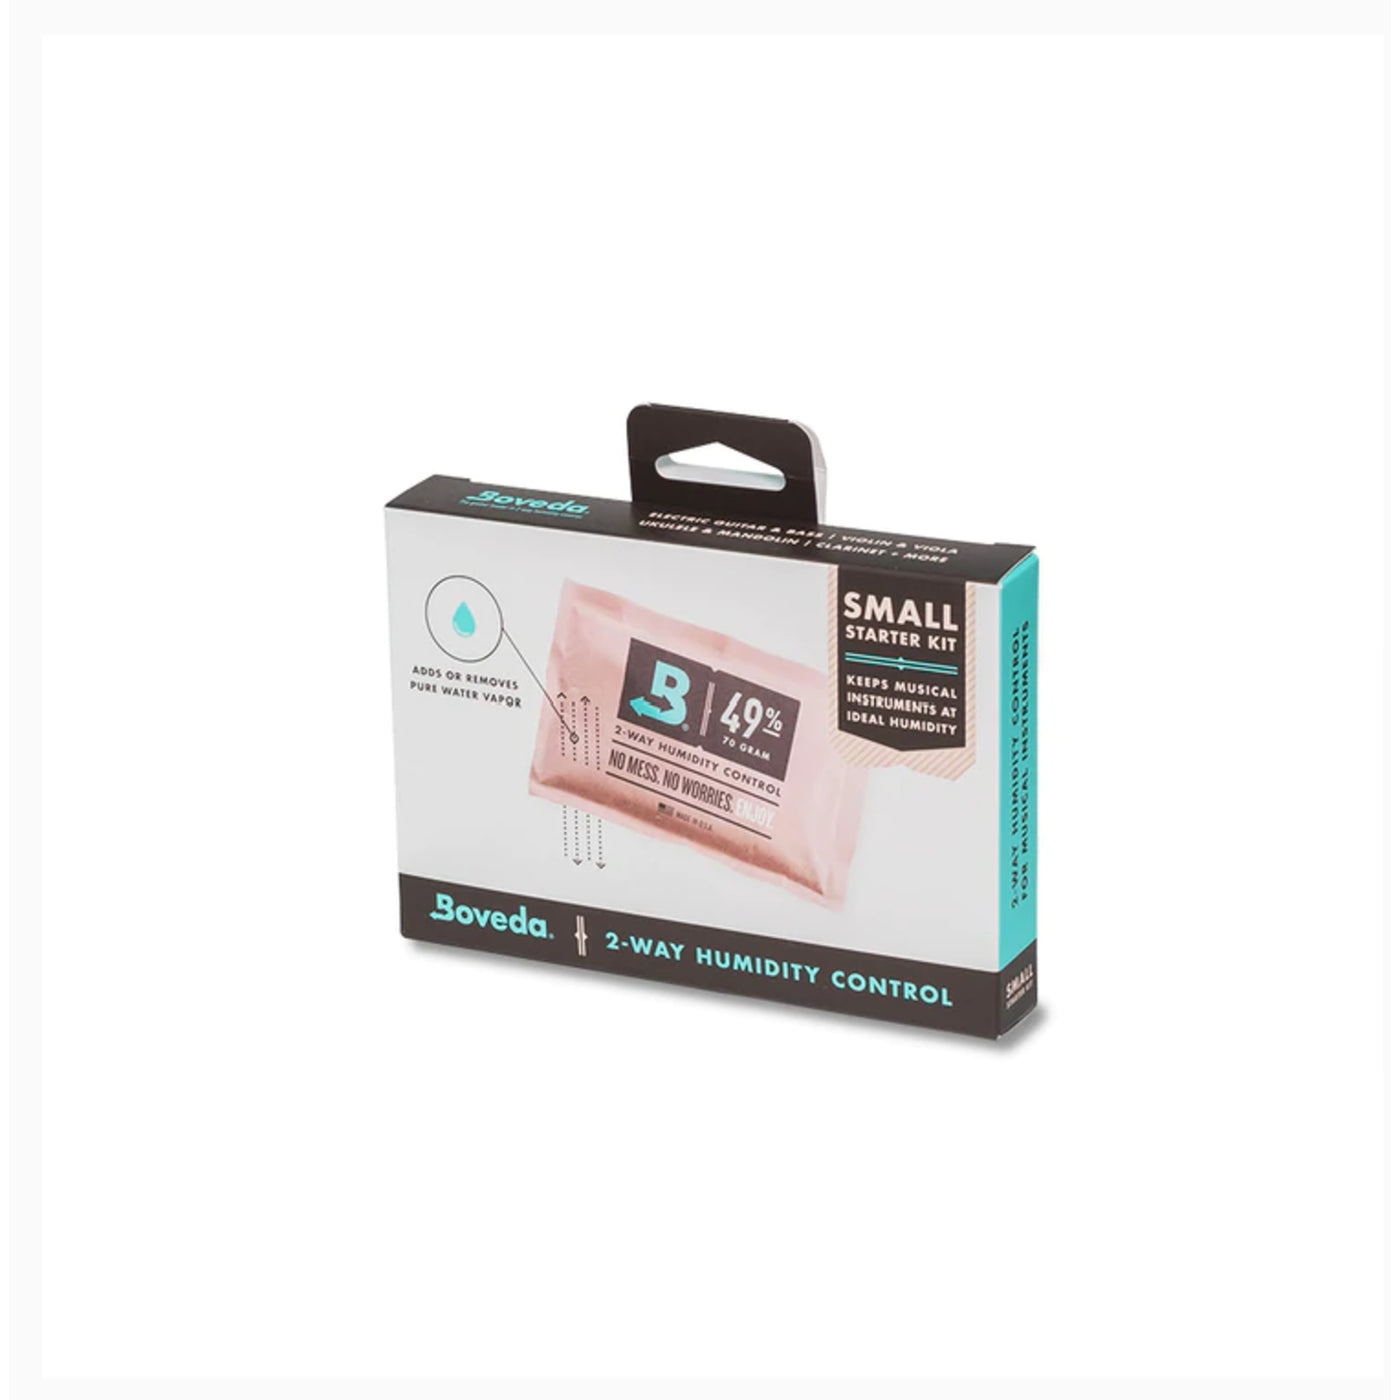 Boveda 2-Way Humidity Control Kit, Small with Saddlebag Holders, 49% RH, 70g (BVMFK-SM)